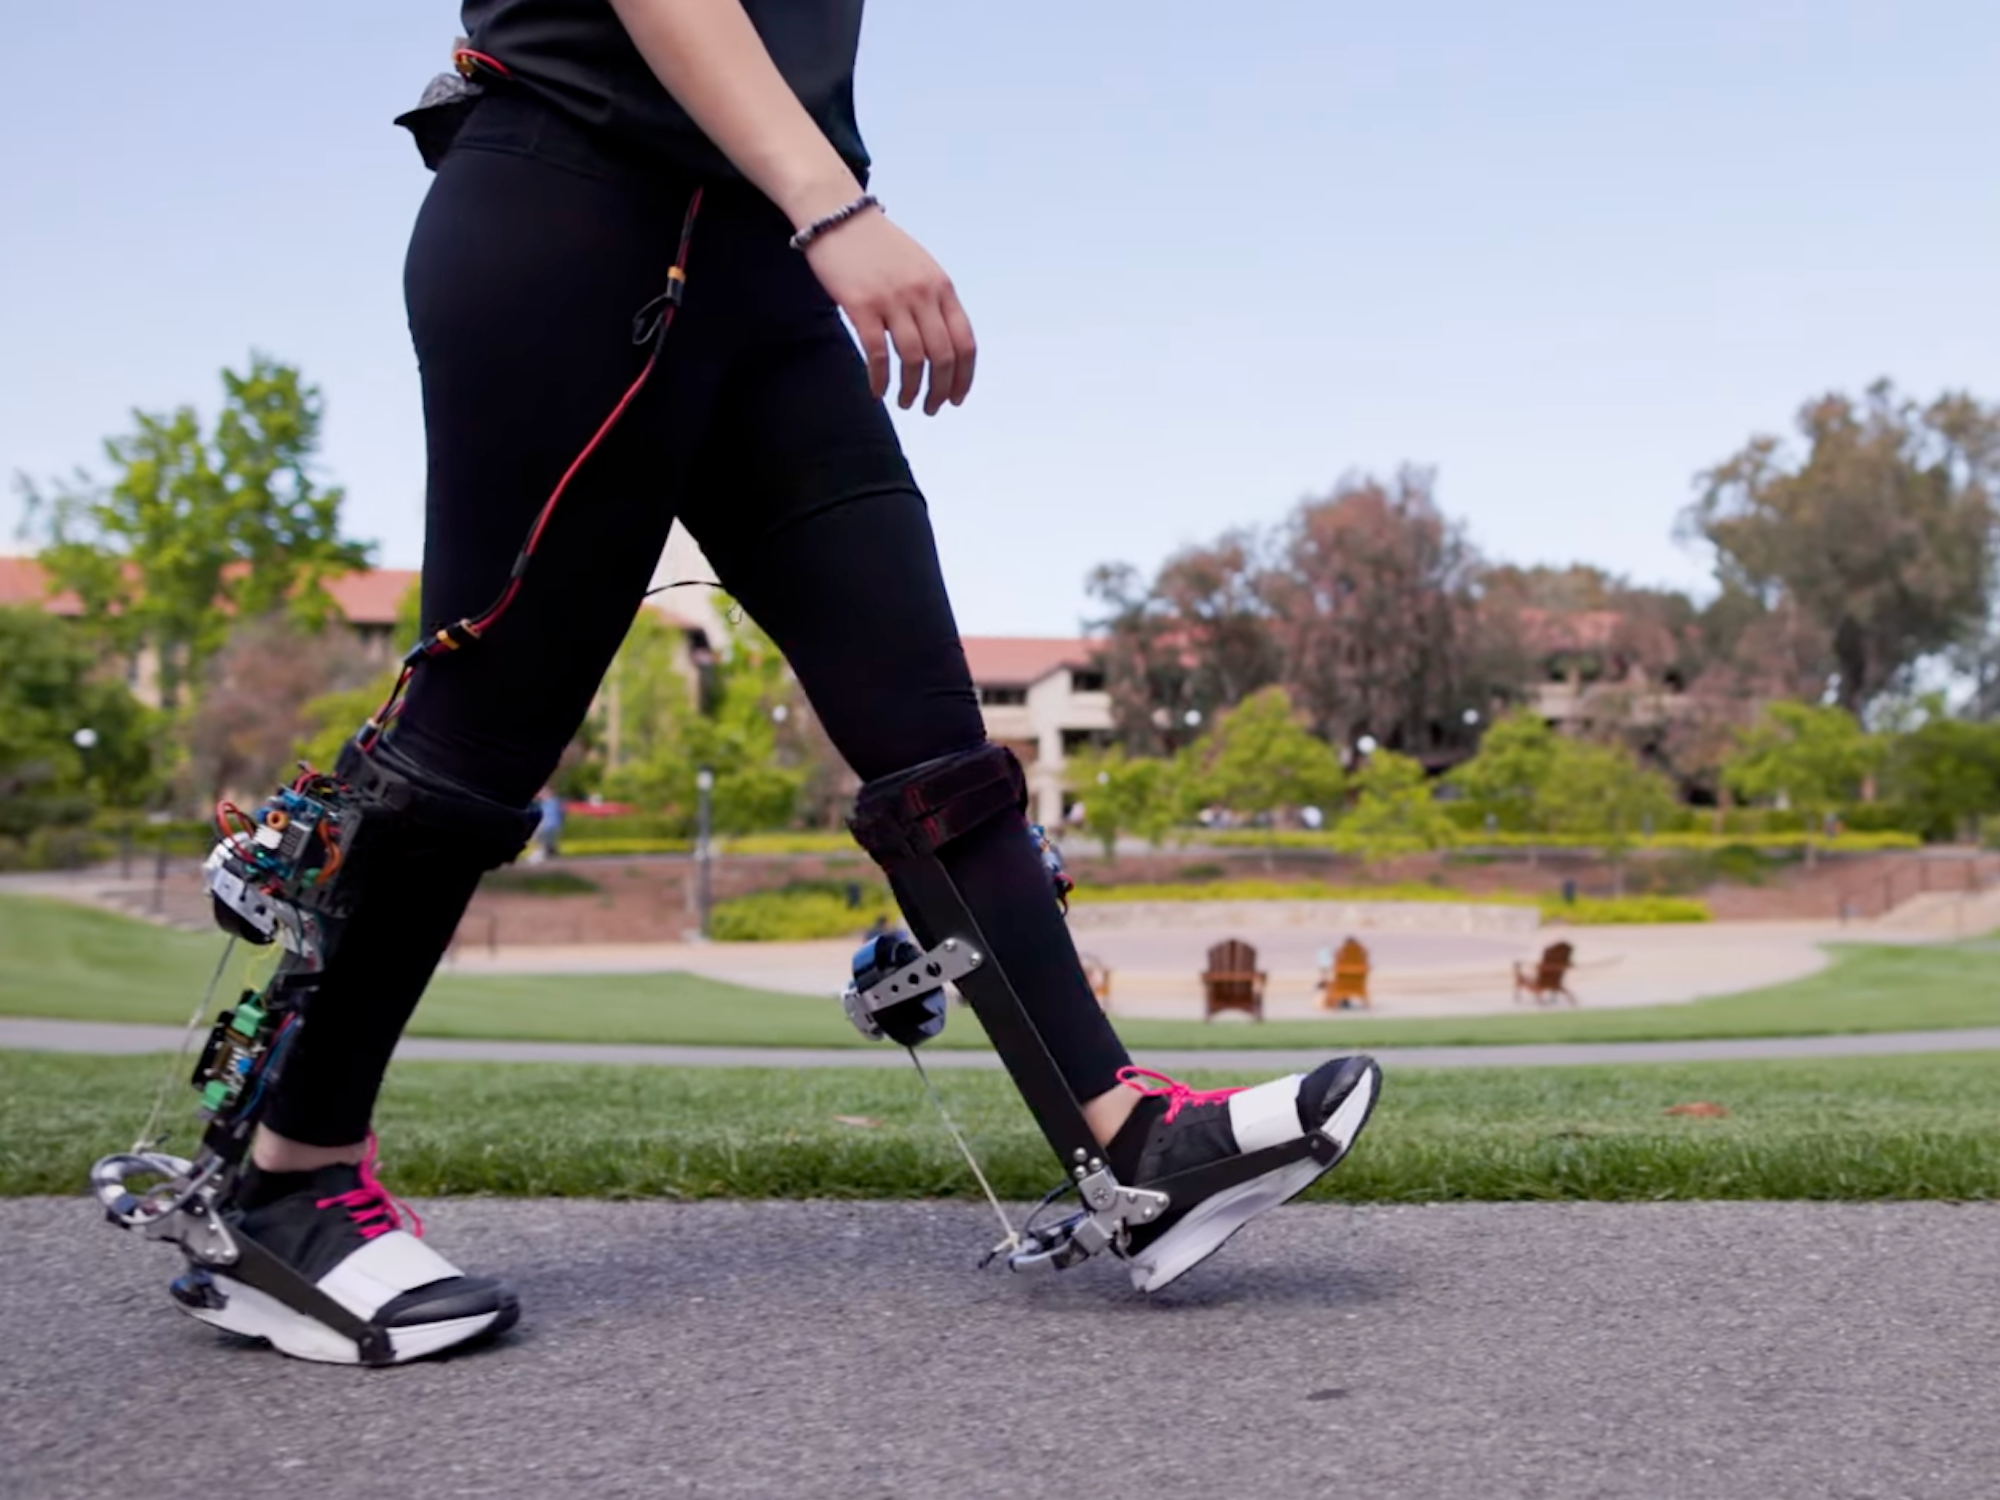 These robotic exoskeleton boots will make you feel 30 pounds lighter